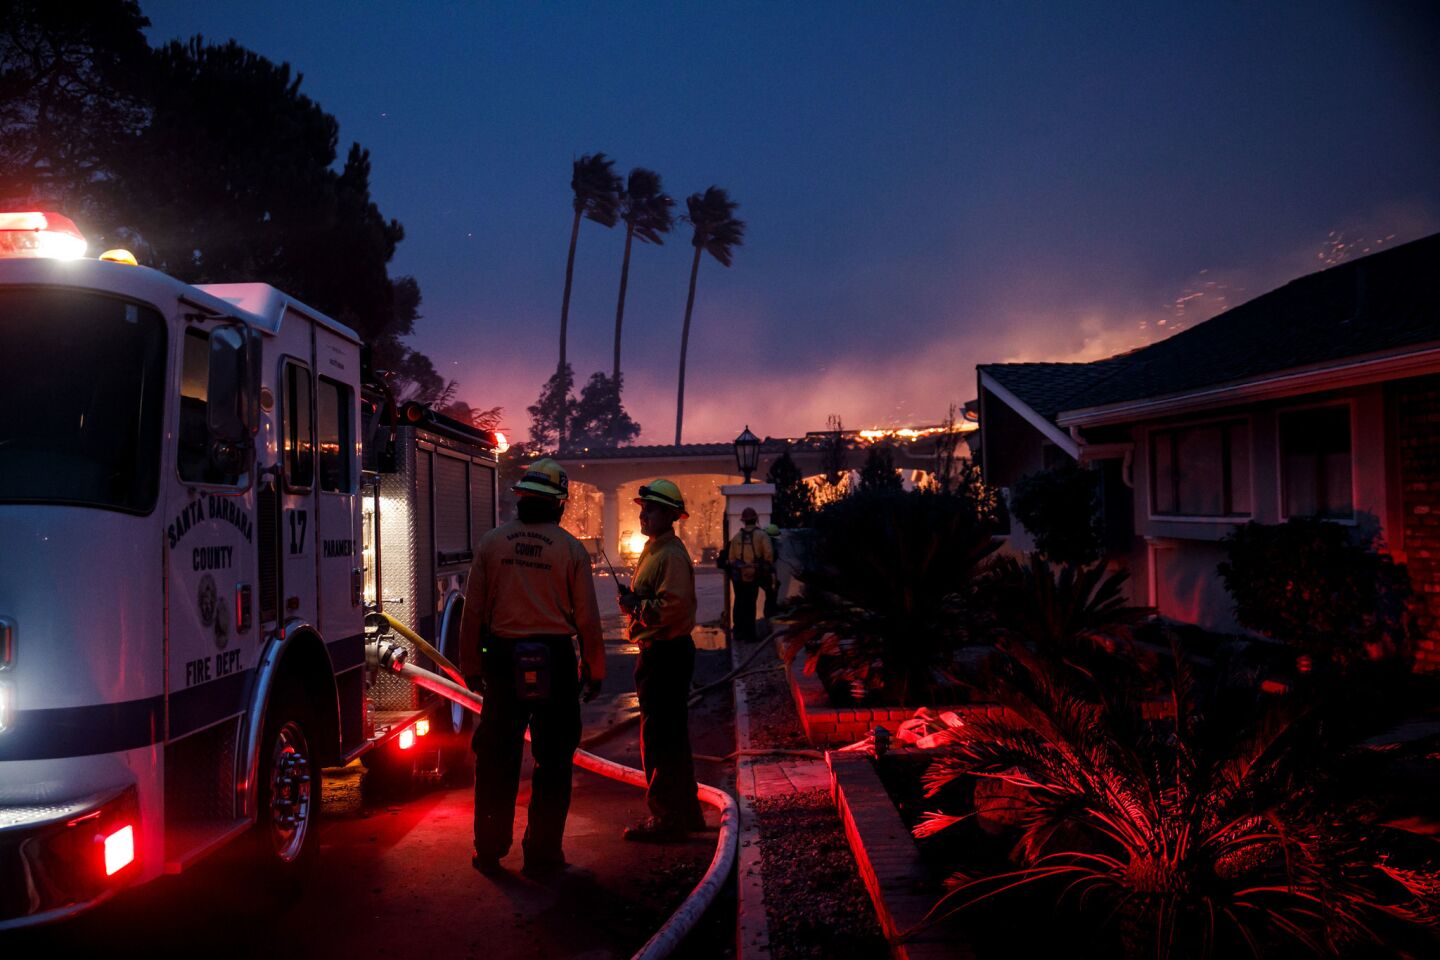 Firefighters are deployed to battle the fire in a Ventura neighborhood.